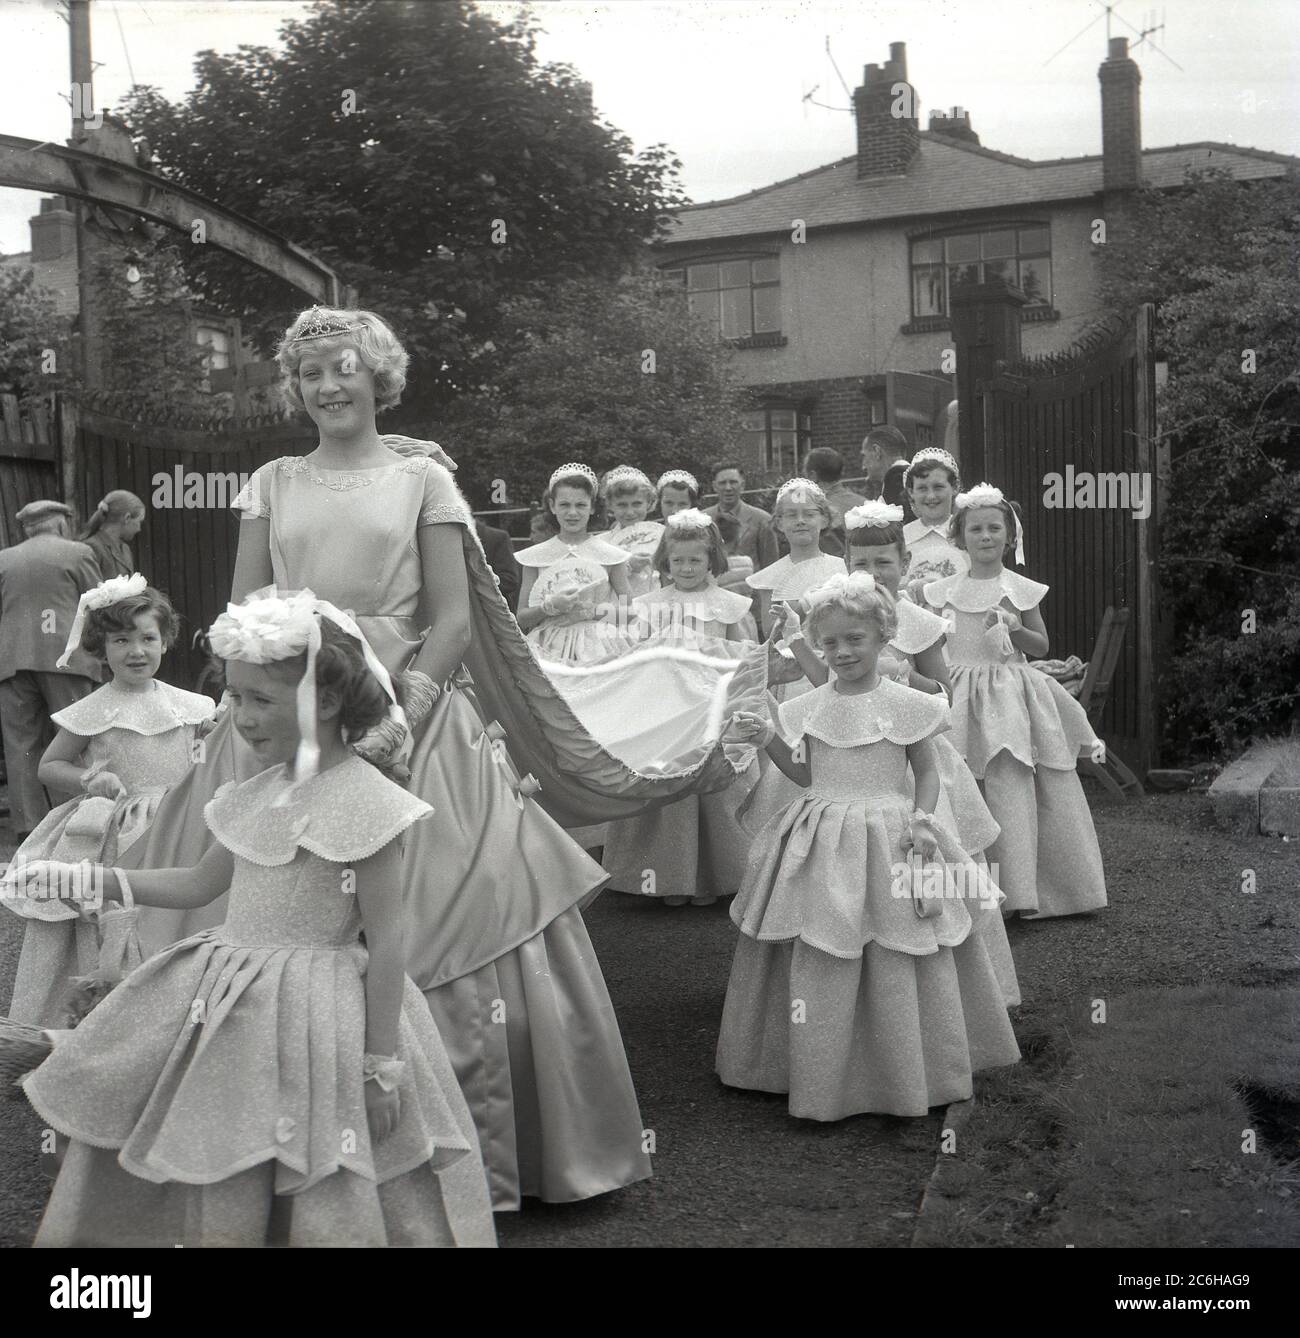 1950s, historical, with a big smile on her face, the town's newly crowned Rose Queen, Farnworth, Bolton, Lancashire, England, UK with her entourage of young girls holding the train, walking in a procession through the local park. Dating back to the 1880s, the annual Rose Queen festival, held in June, became a major annual event in many towns and villages across the UK, especially in Lancashire, known as the red rose county, following the 1455-87 Wars of the Roses. Stock Photo